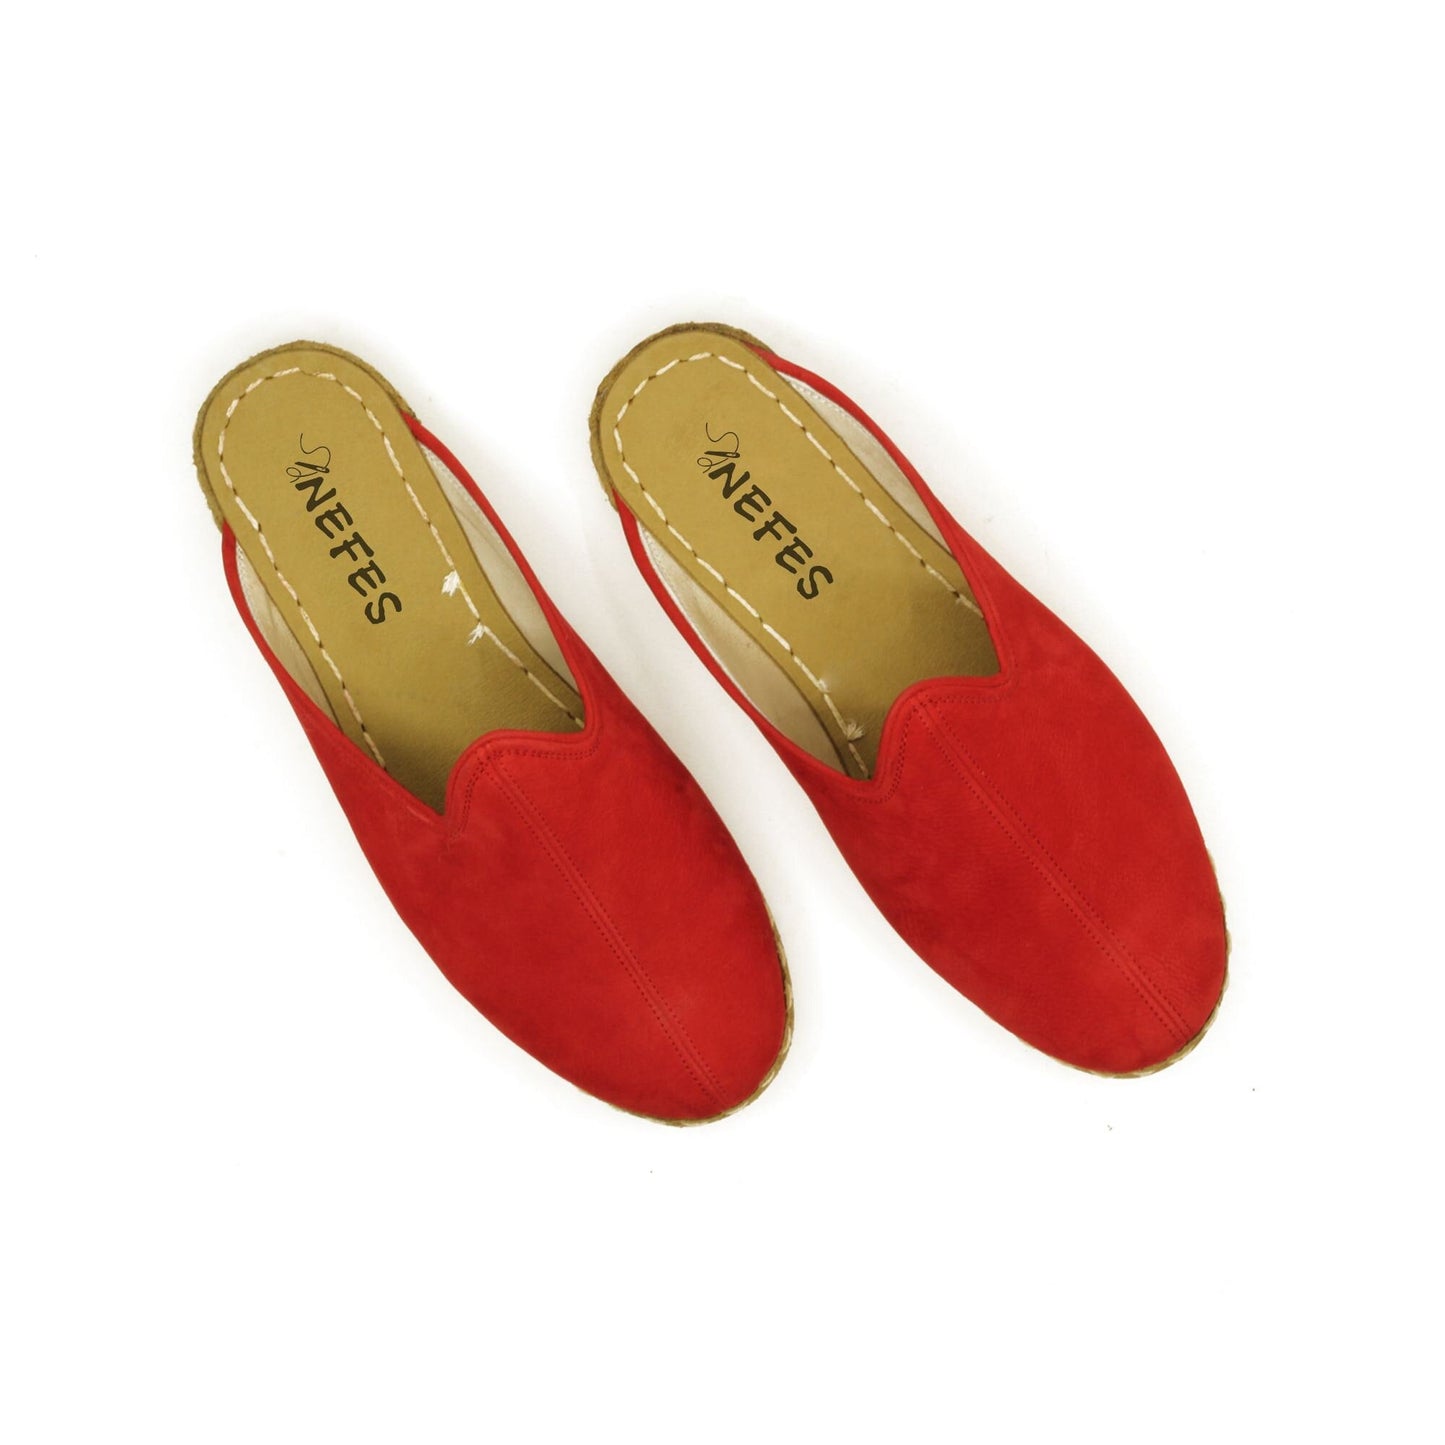 Close Toed Slippers - Red Nubuck Leather - Winter Slippers - Rubber Sole - For Women